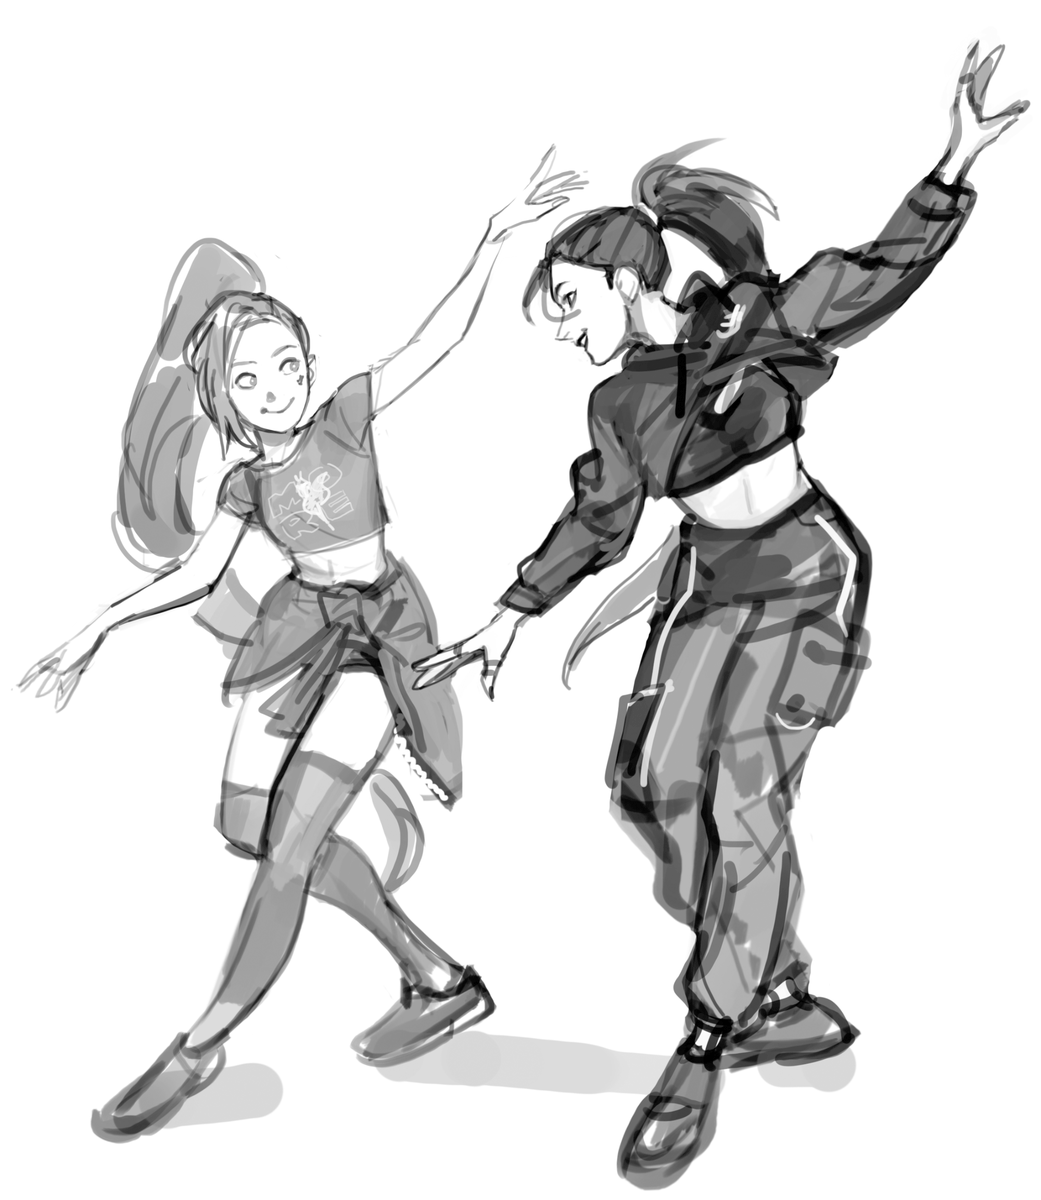 they did a little dance together in the choreo, so very good for them 